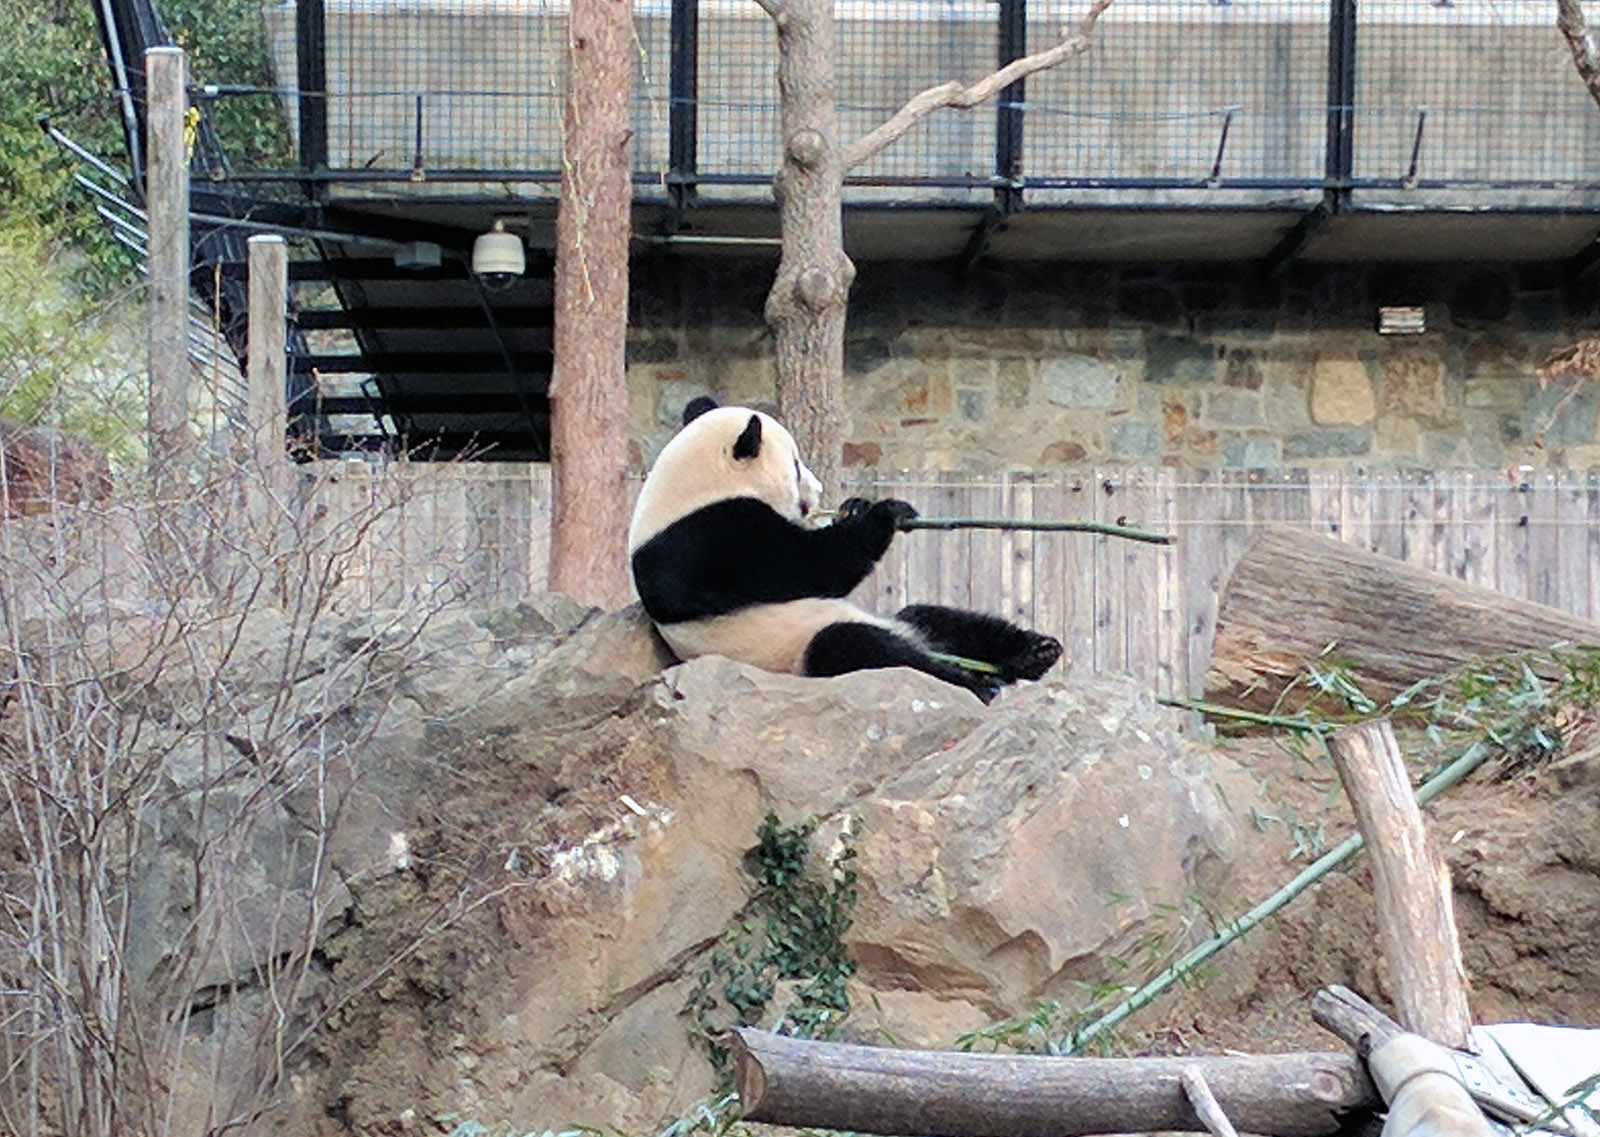 Giant panda Bao Bao enjoys some bamboo during her final hours at the National Zoo. She was set to depart for China on Tuesday, Feb. 21, 2017. (WTOP/Ginger Whitaker)